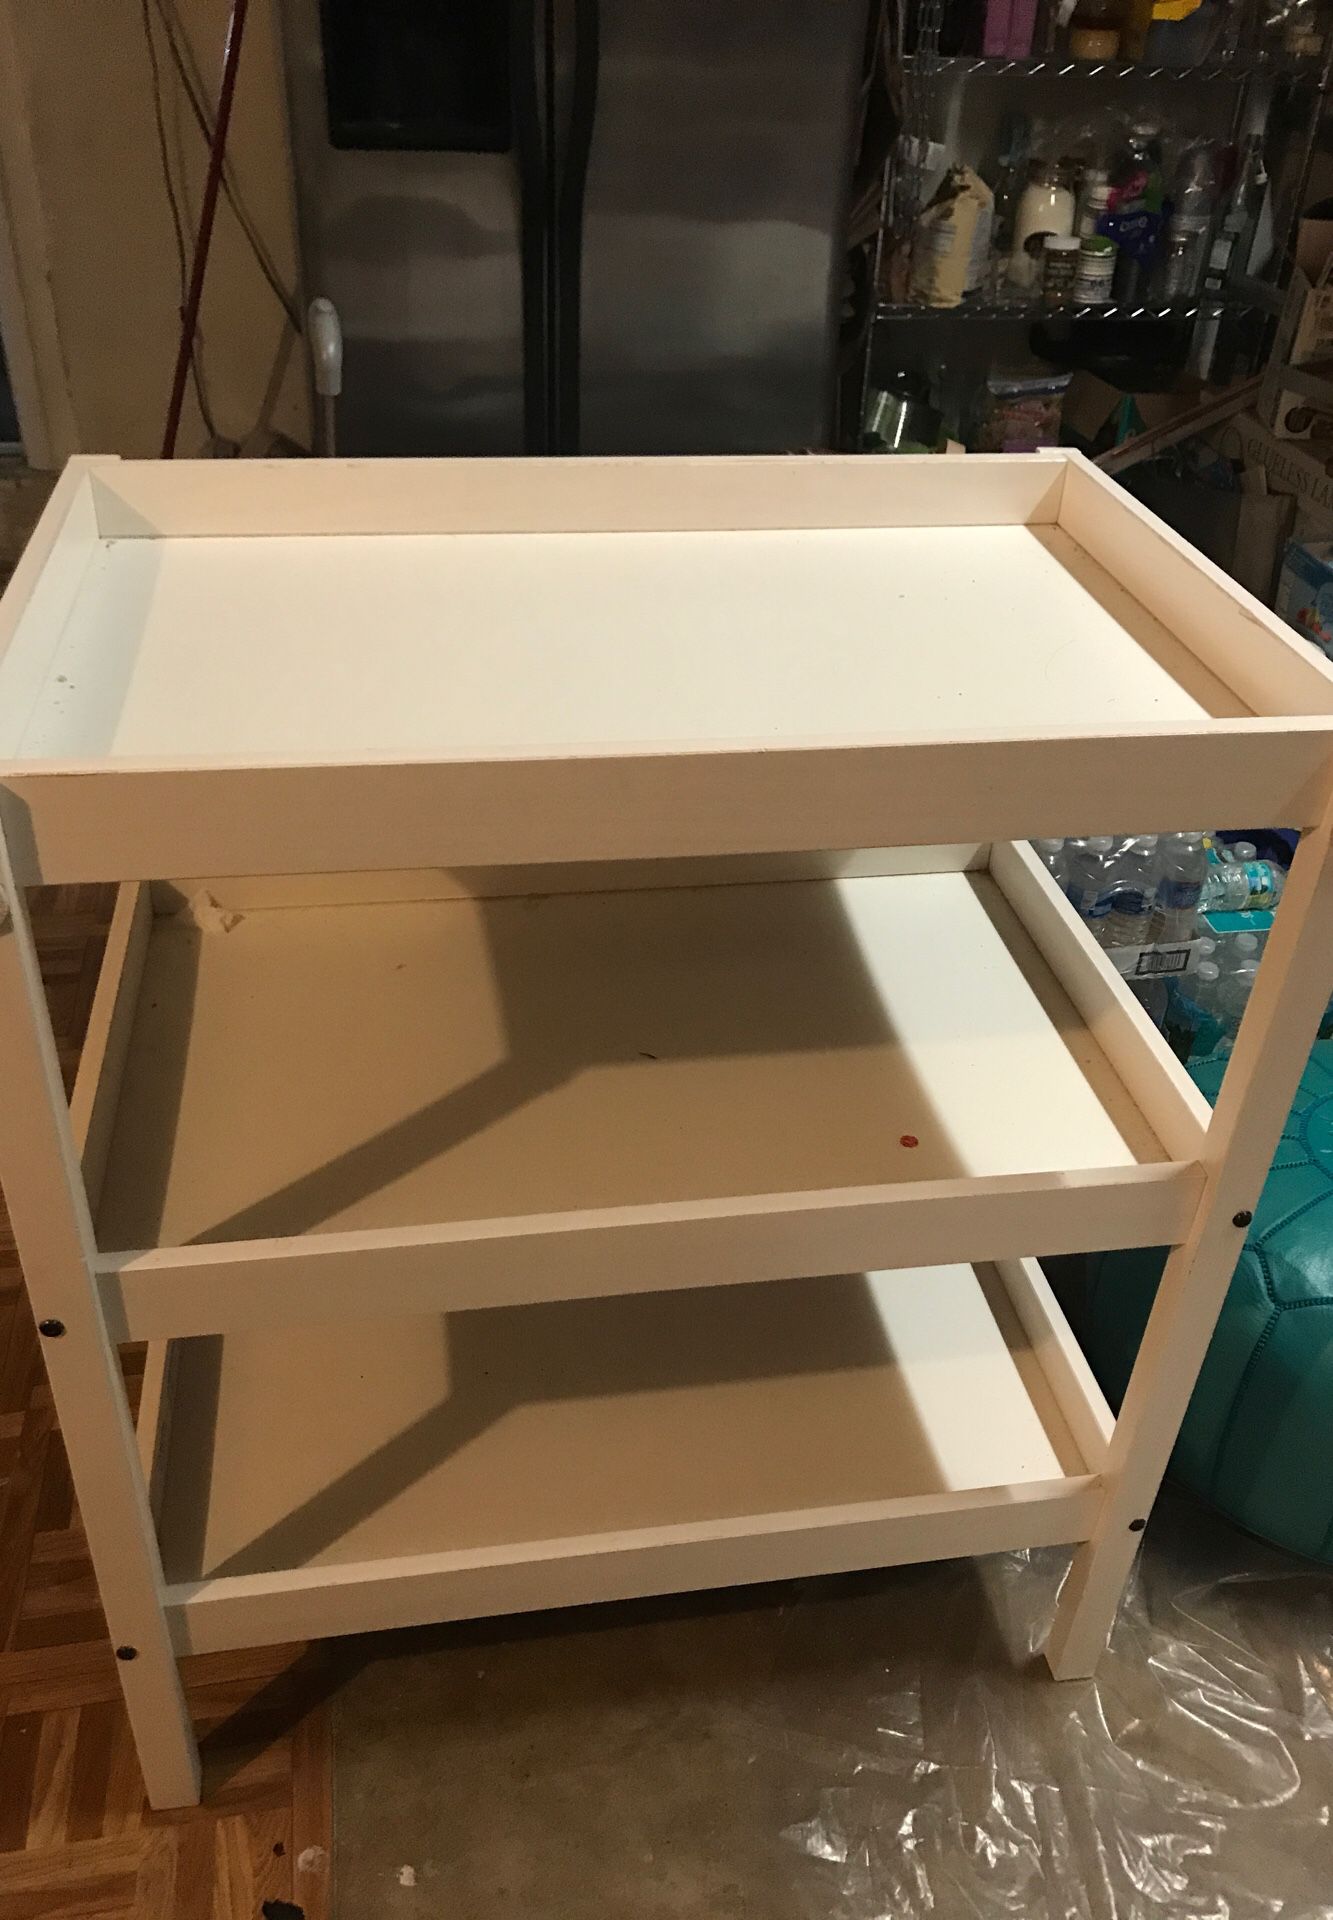 Changing table with changing mattress and two fitted sheets for it